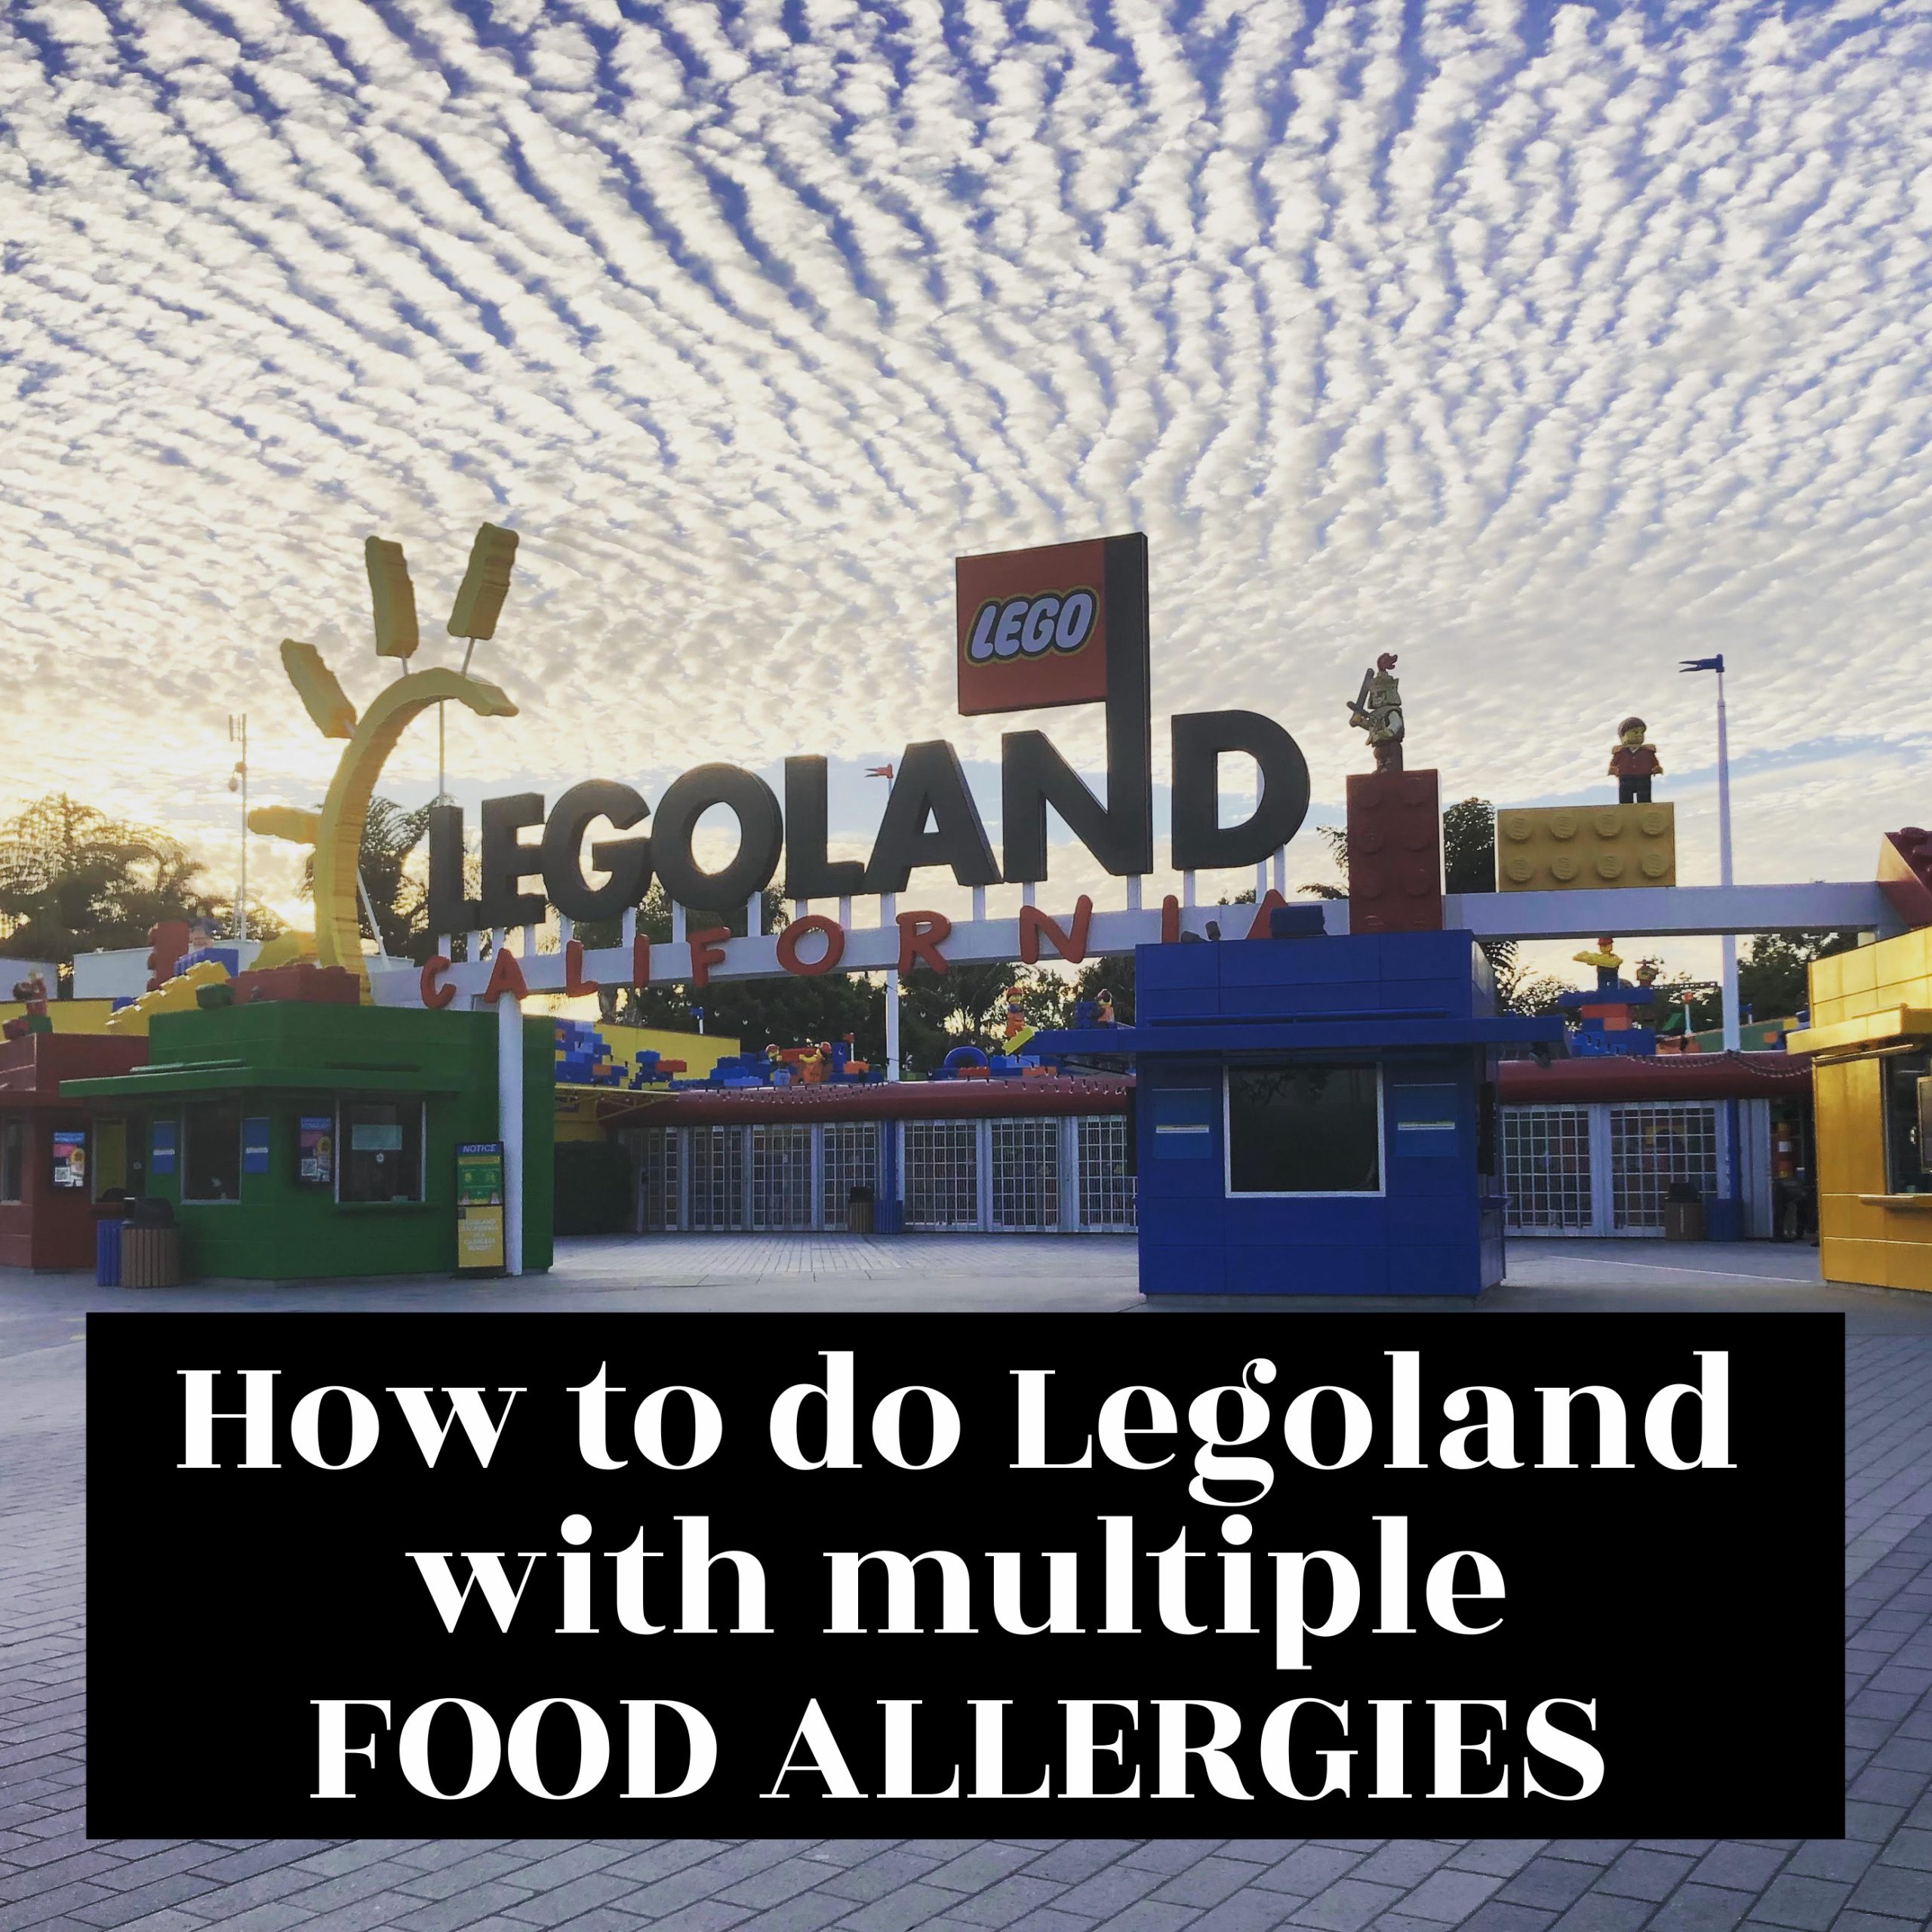 how-to-do-legoland-with-multiple-food-allergies-article